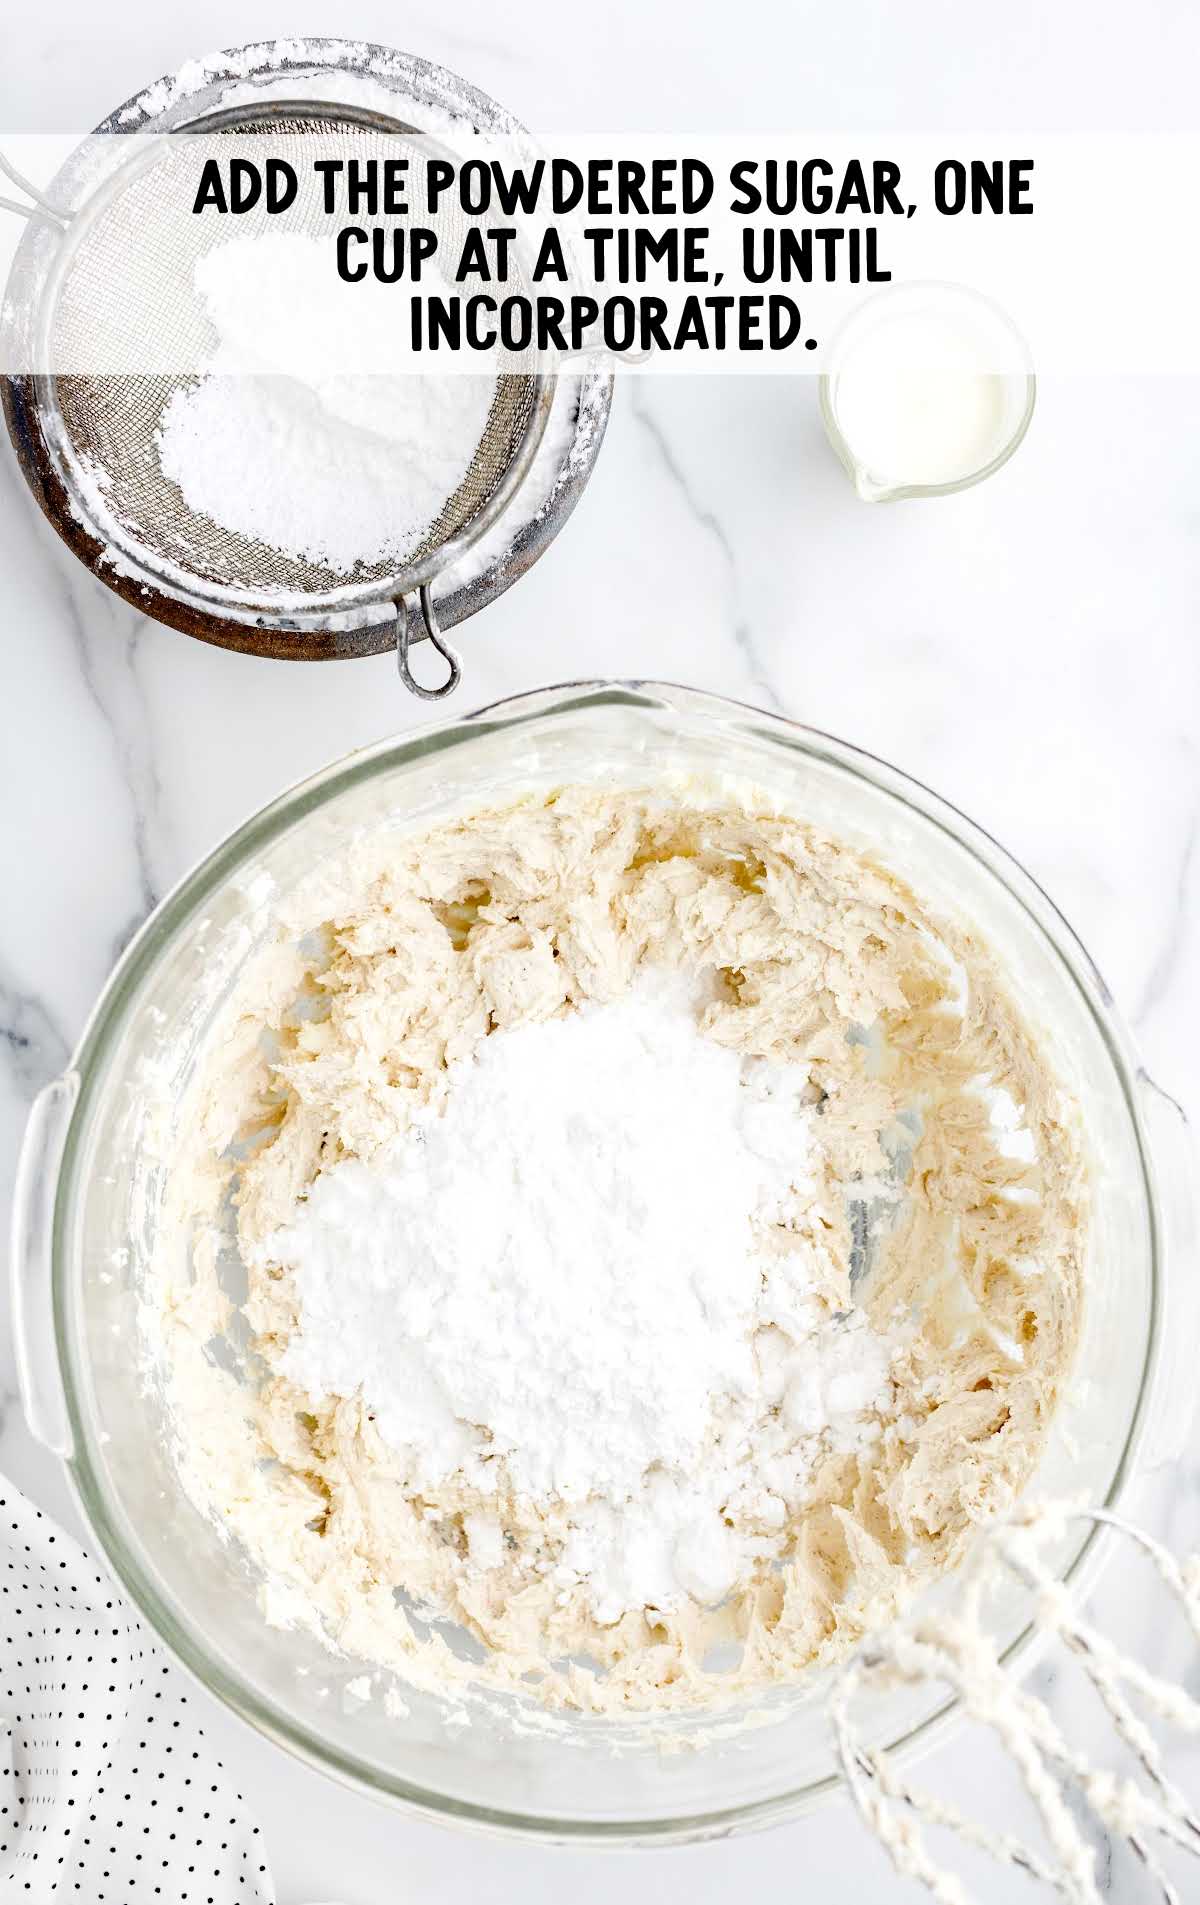 powdered sugar added to the cream cheese mixture in a bowl